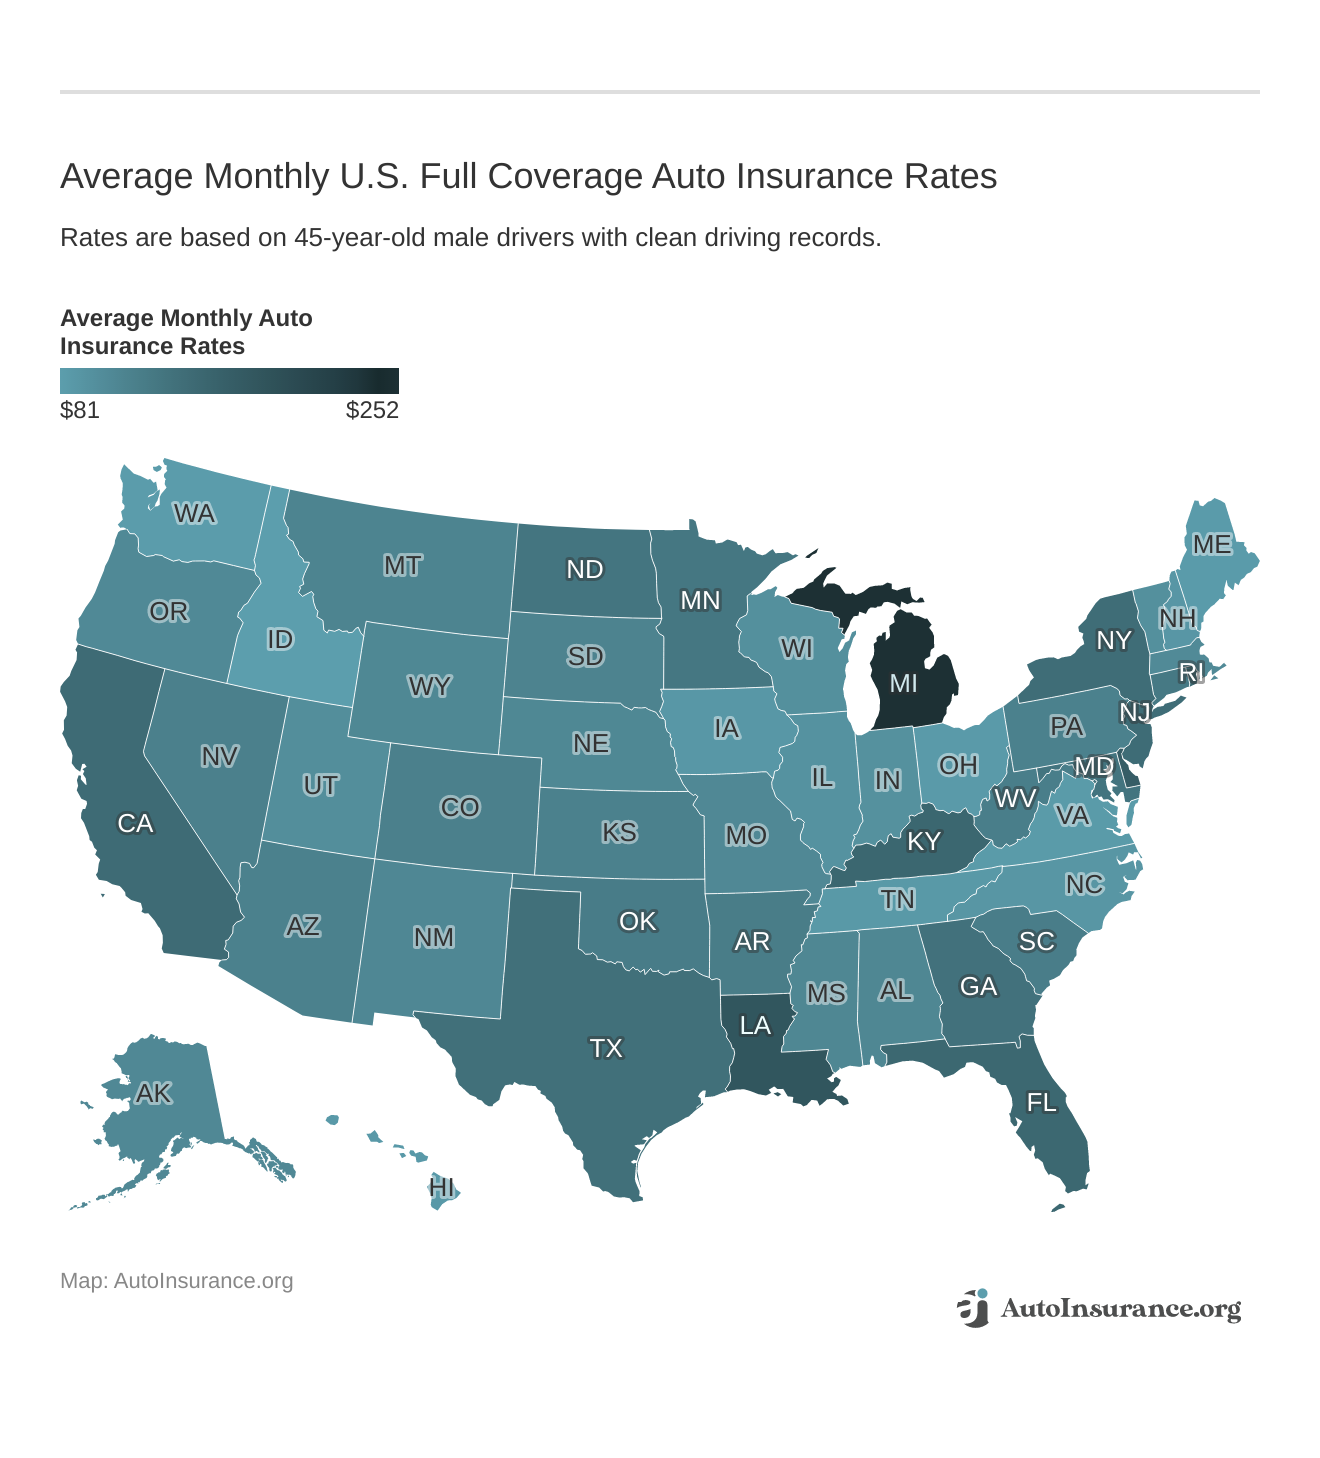 <h3>Average Monthly U.S. Full Coverage Auto Insurance Rates</h3>